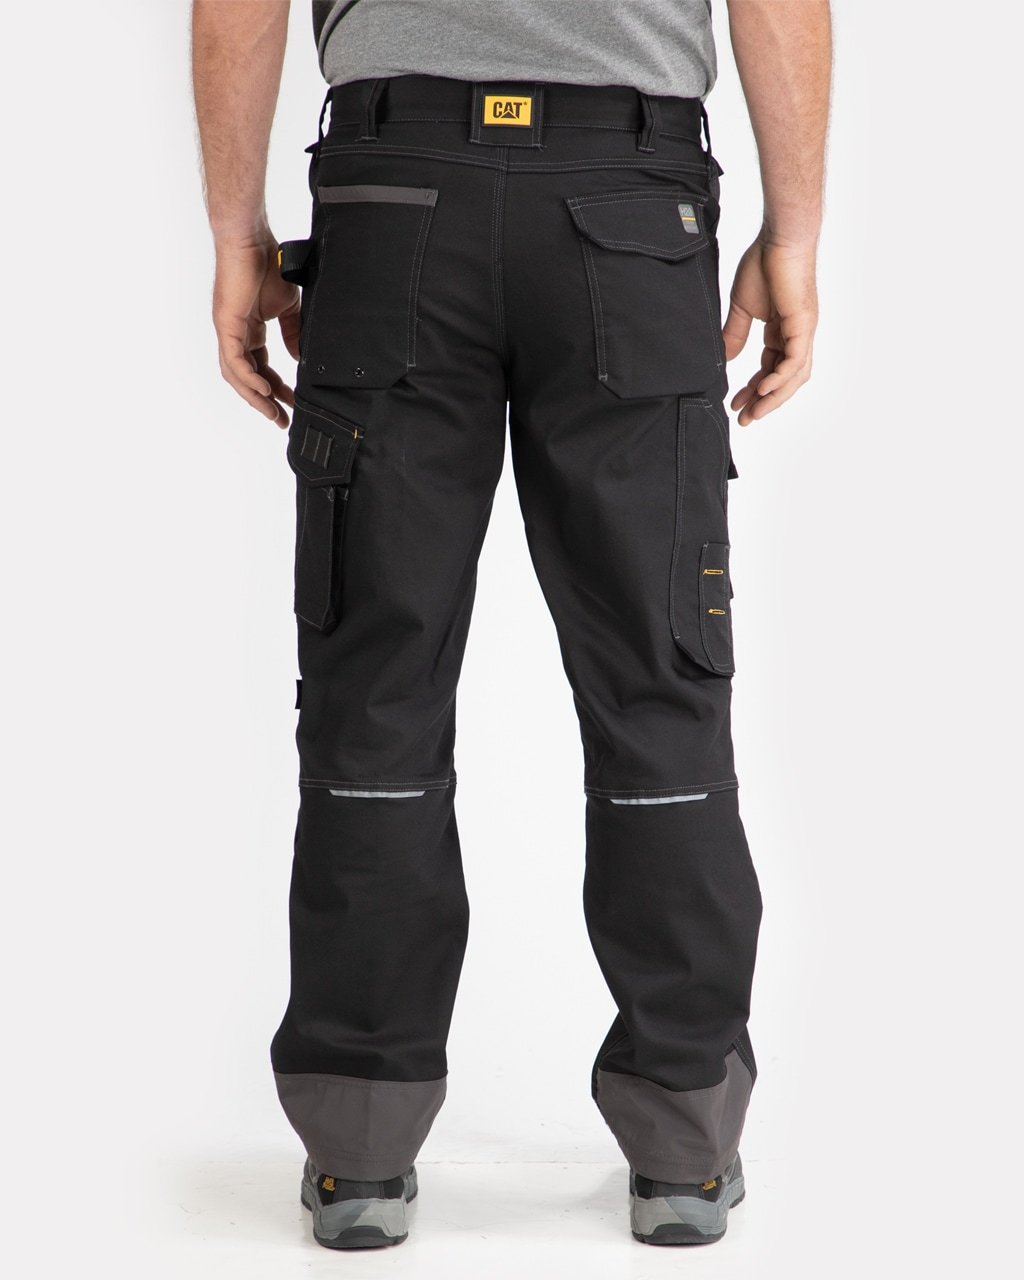 CAT H2O Defender Pant - Work World - Workwear, Work Boots, Safety Gear